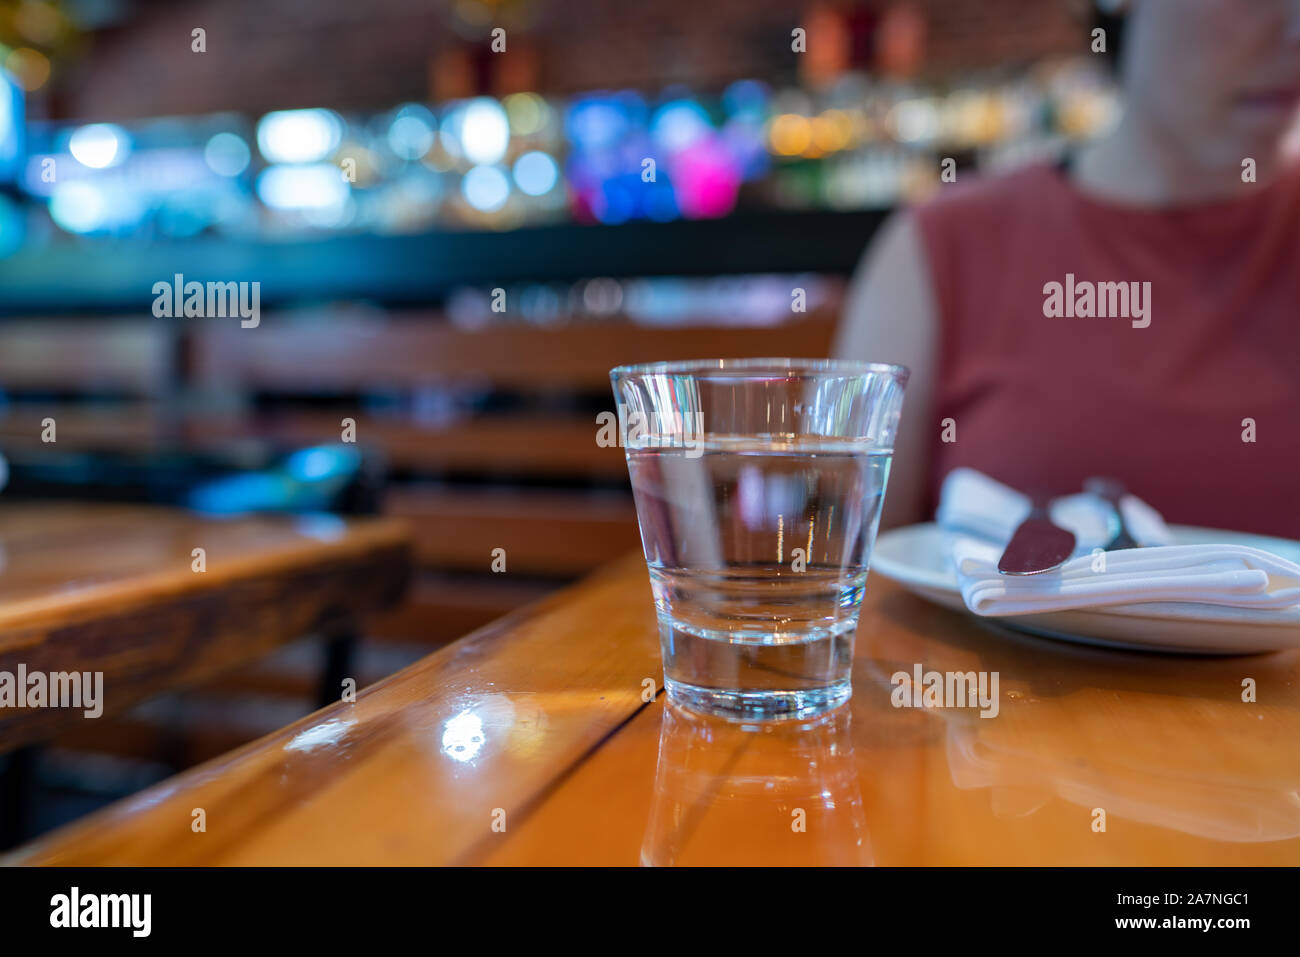 Glass of water in front of woman in dining restaurant table Stock Photo